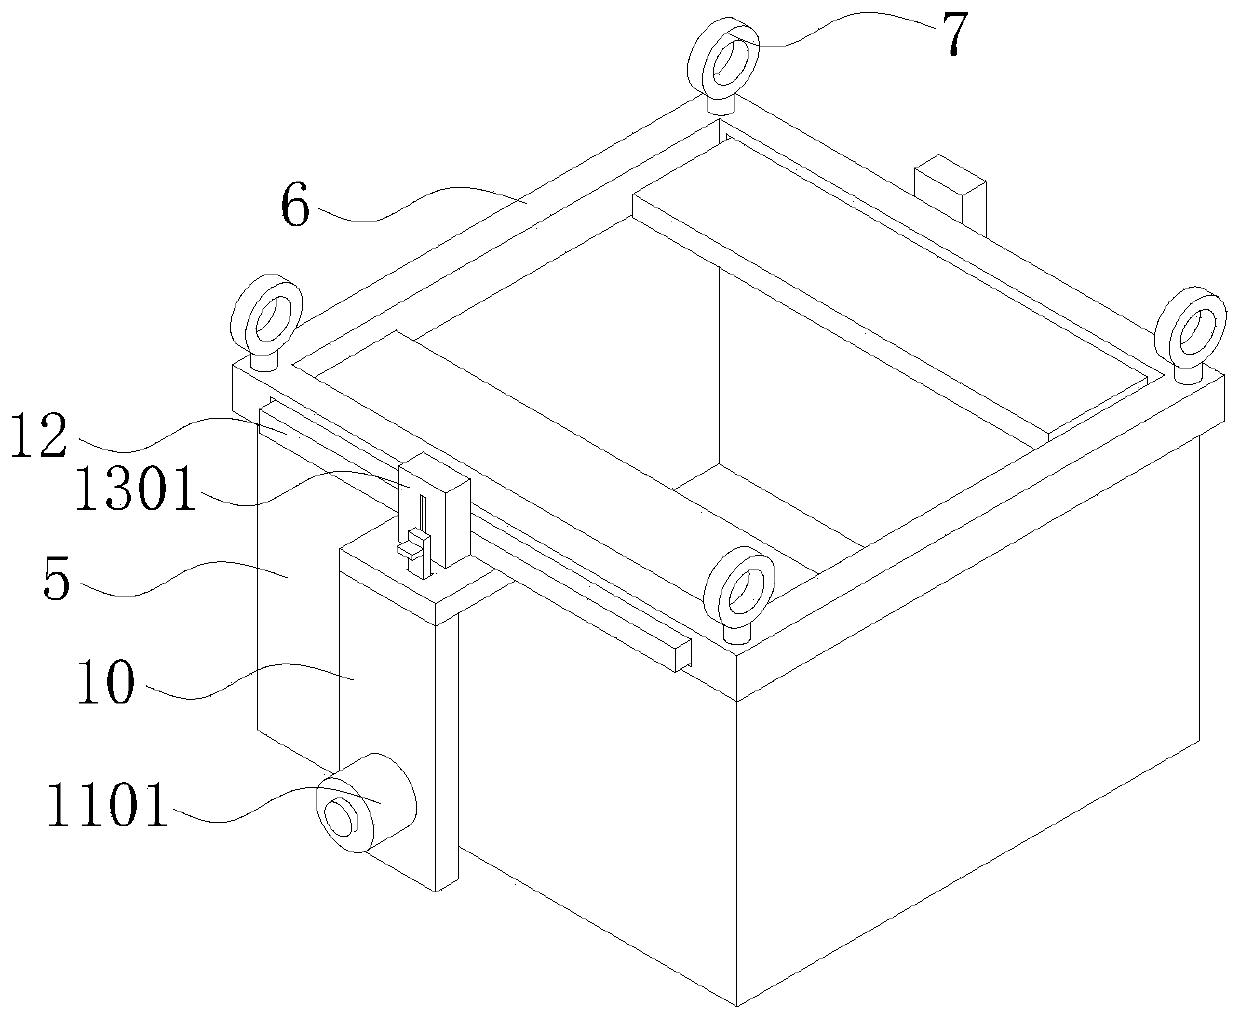 Protective shell of mold and mold mounting method